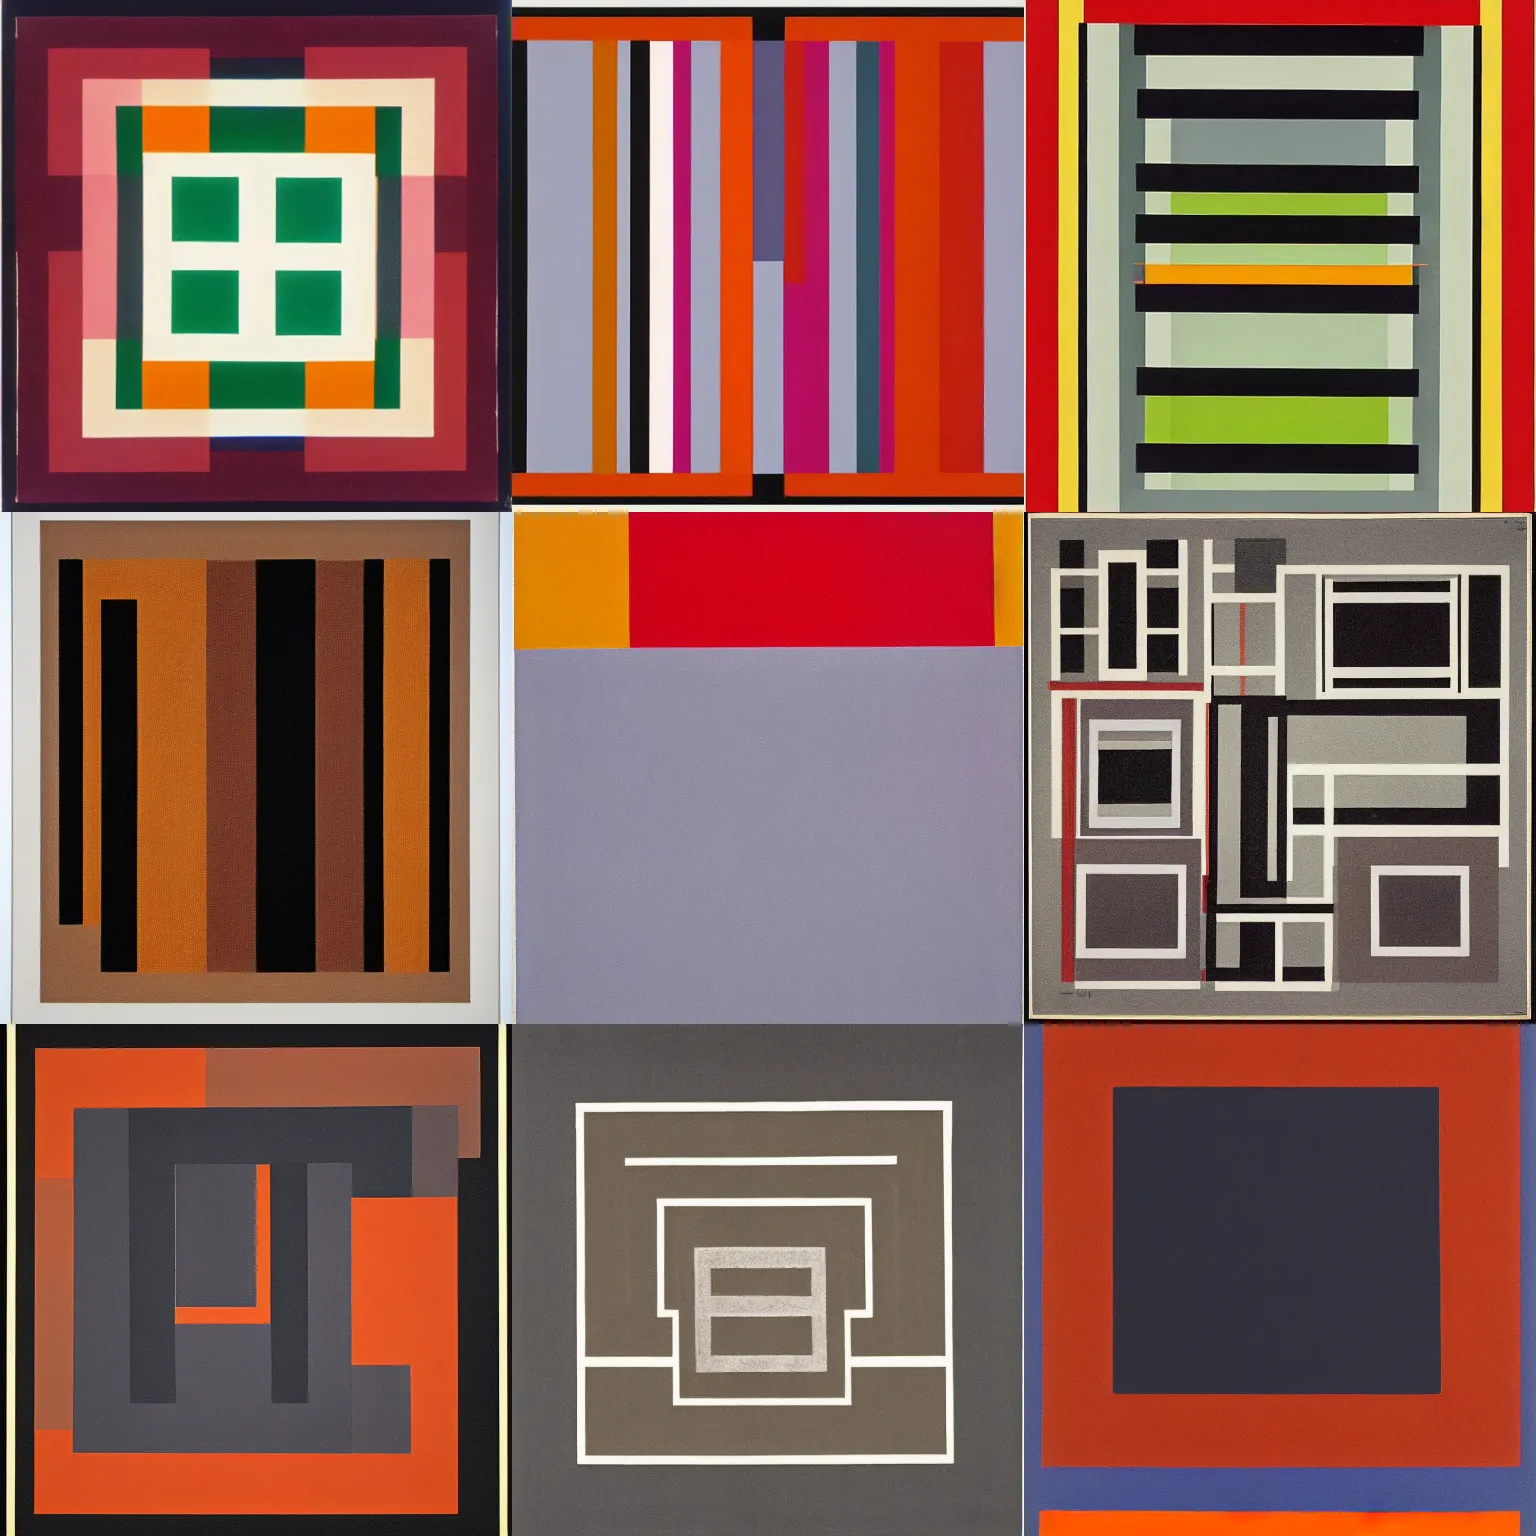 an artwork by josef albers | Stable Diffusion